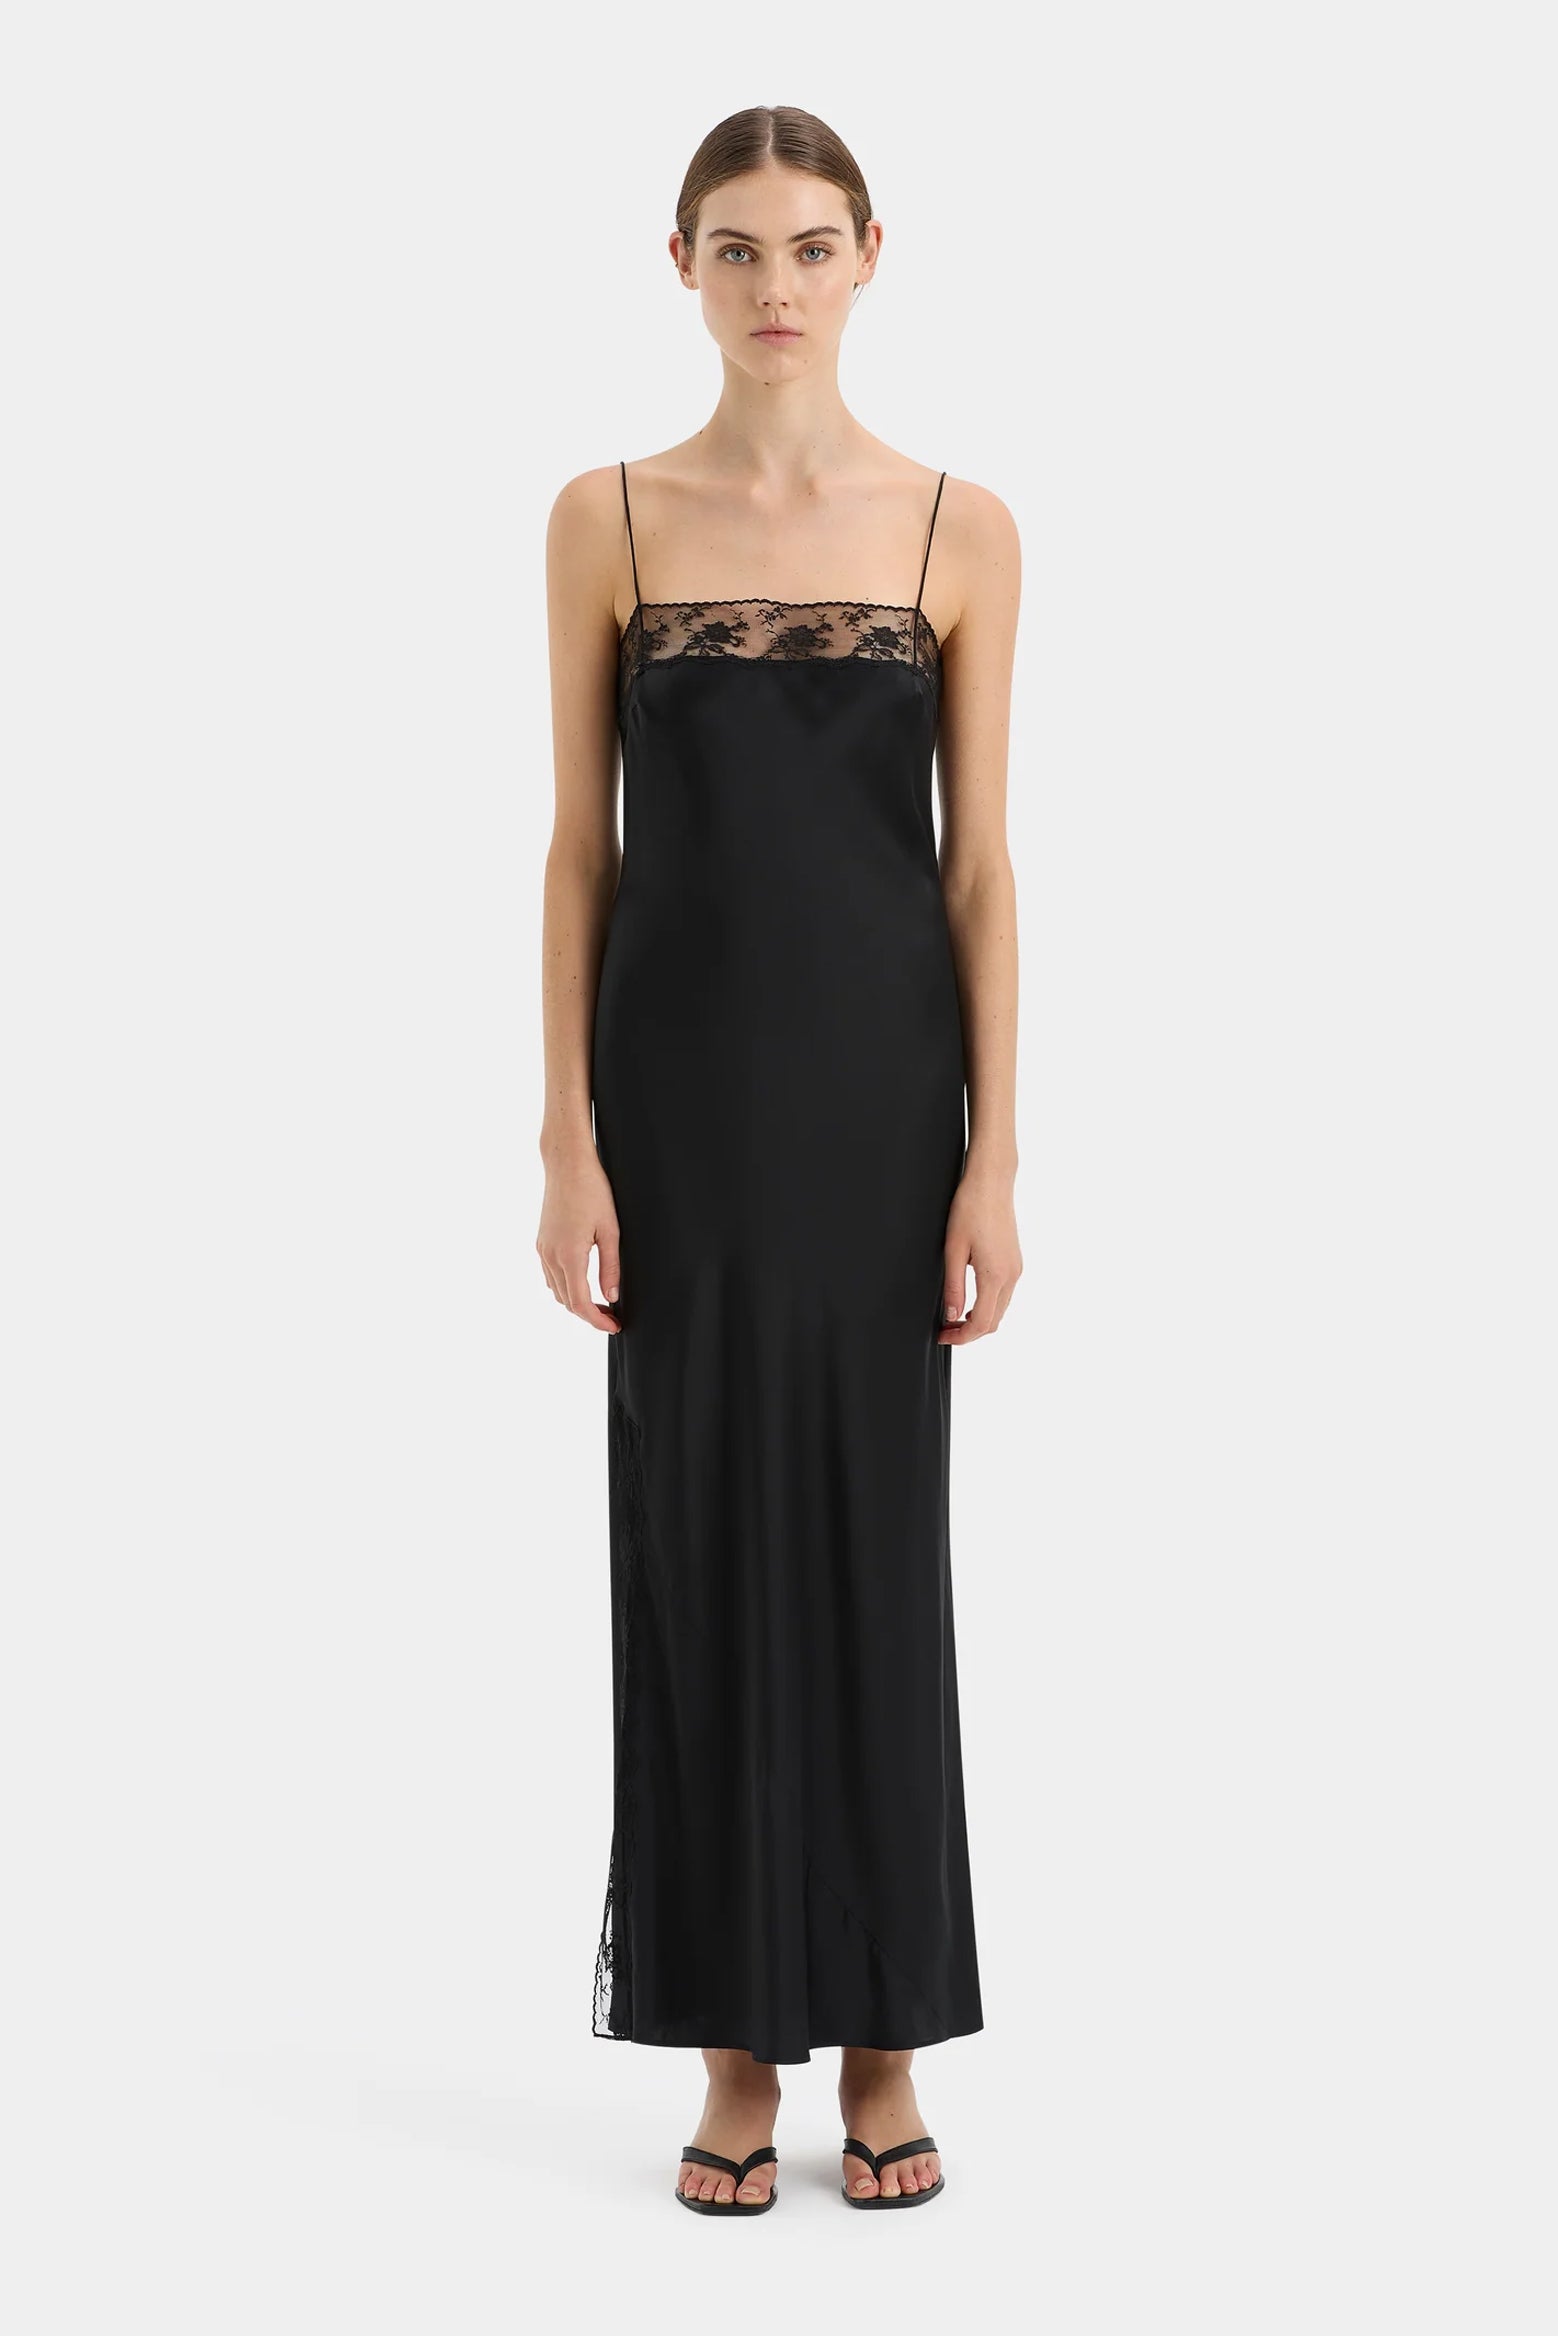 SIR Aries Lace Slip Dress in Black available at The New Trend Australia.